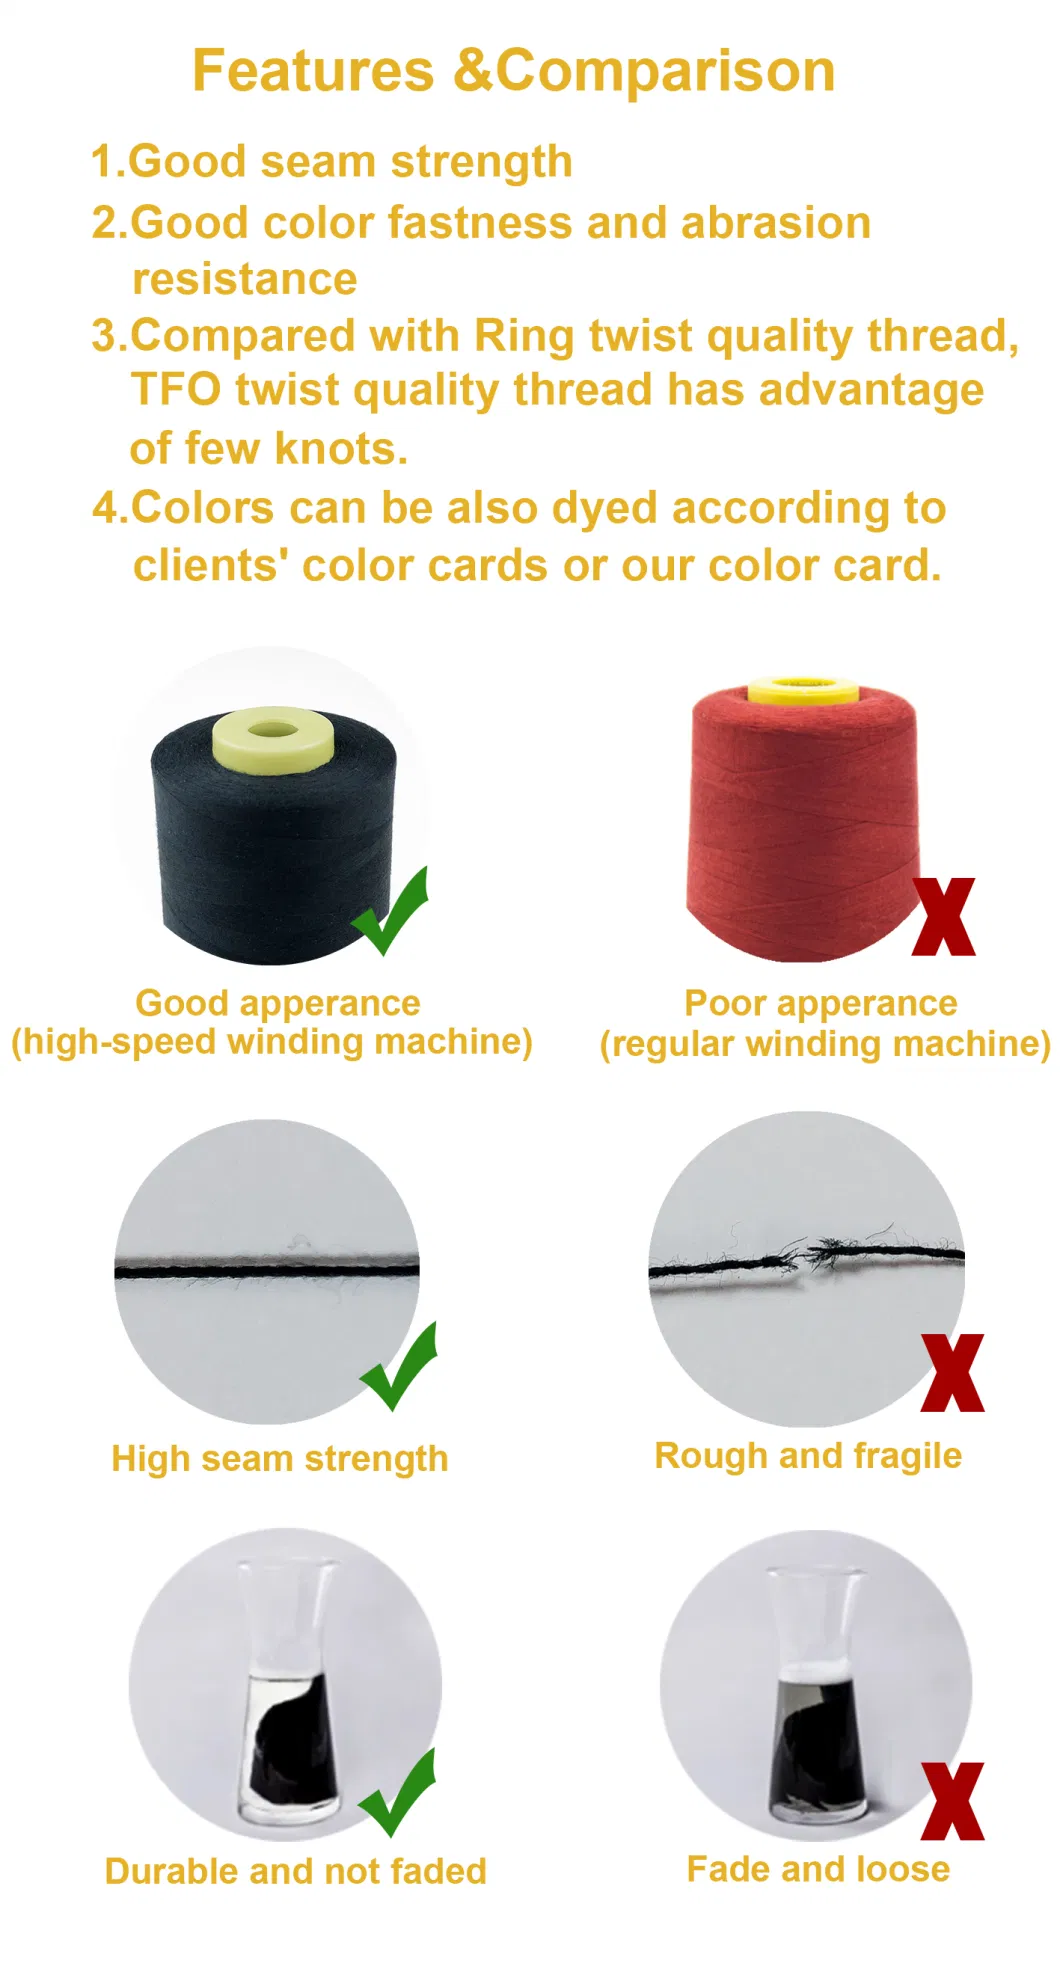 100% High Quality Spun Polyester Sewing Thread for Clothes